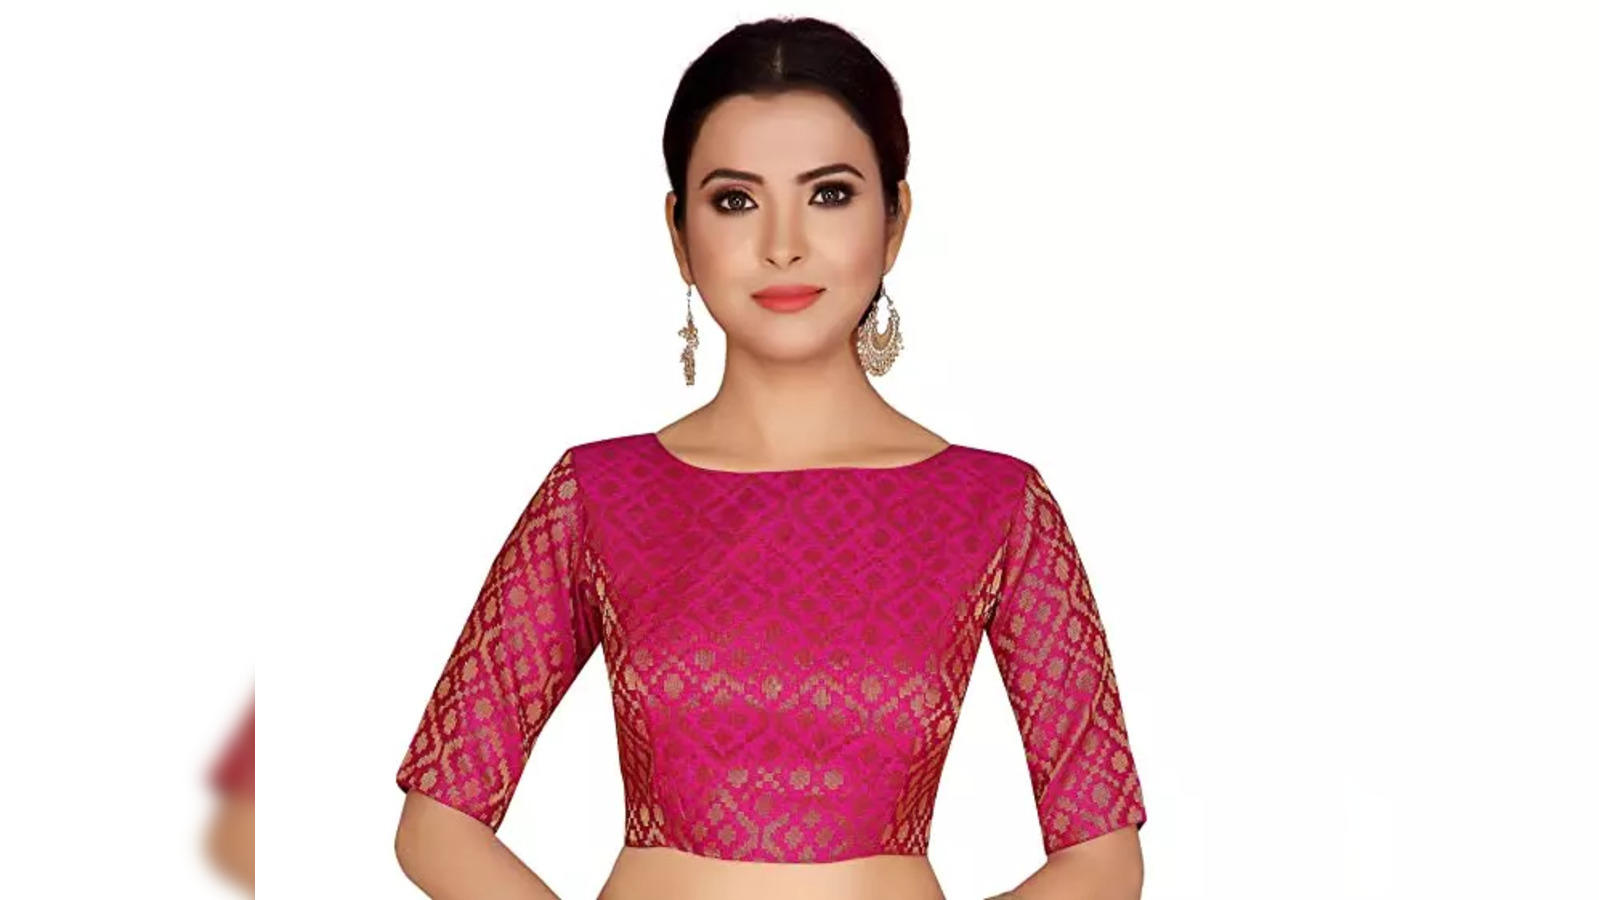 High Neck Blouse - Buy High Neck Blouse online at Best Prices in India